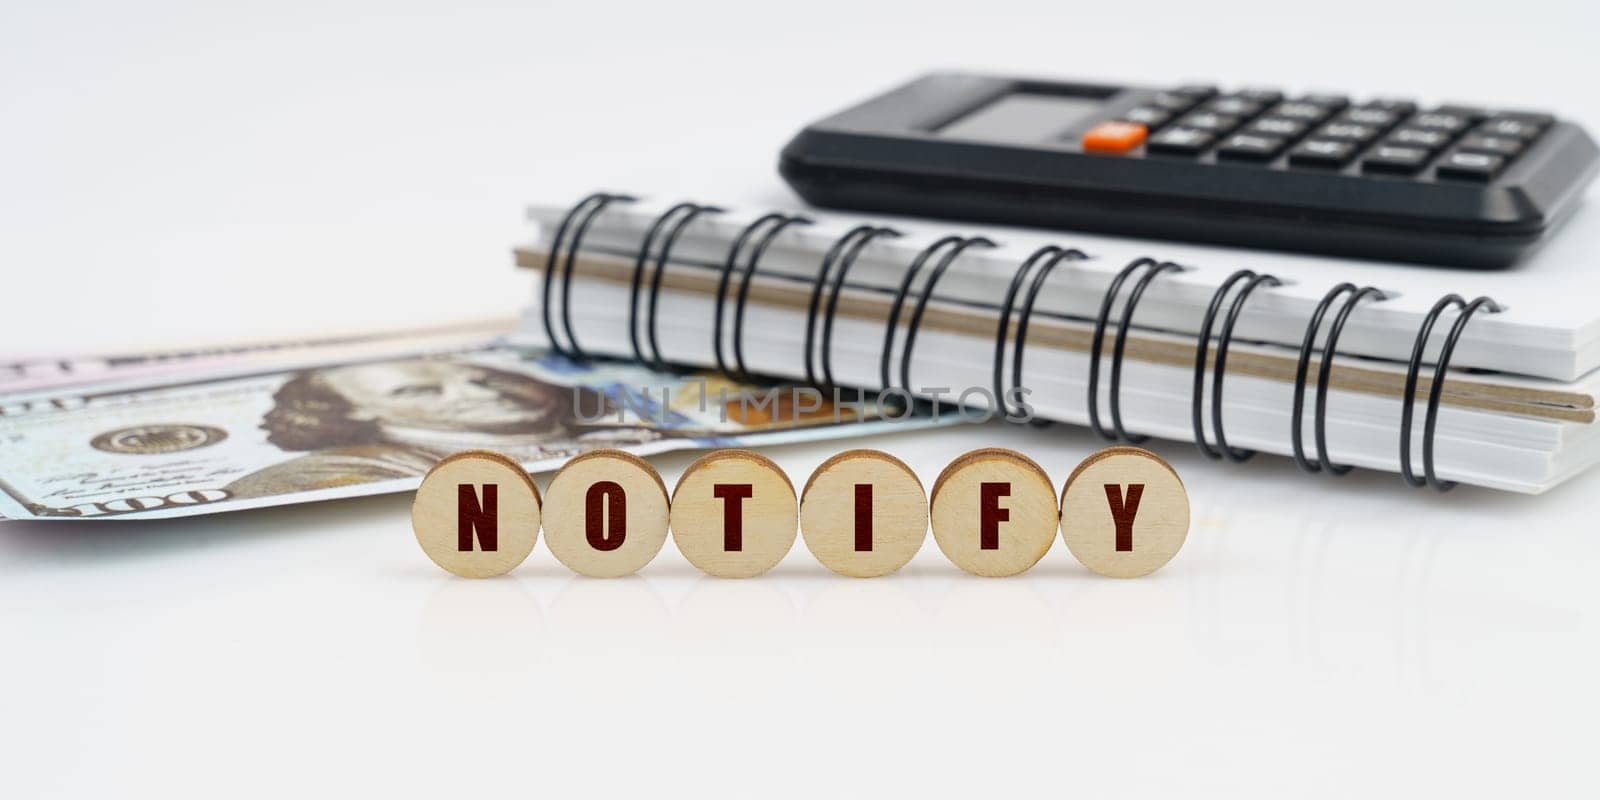 Business and finance concept. On a high surface lie a notepad, a calculator, dollars and wooden circles with the inscription - NOTIFY